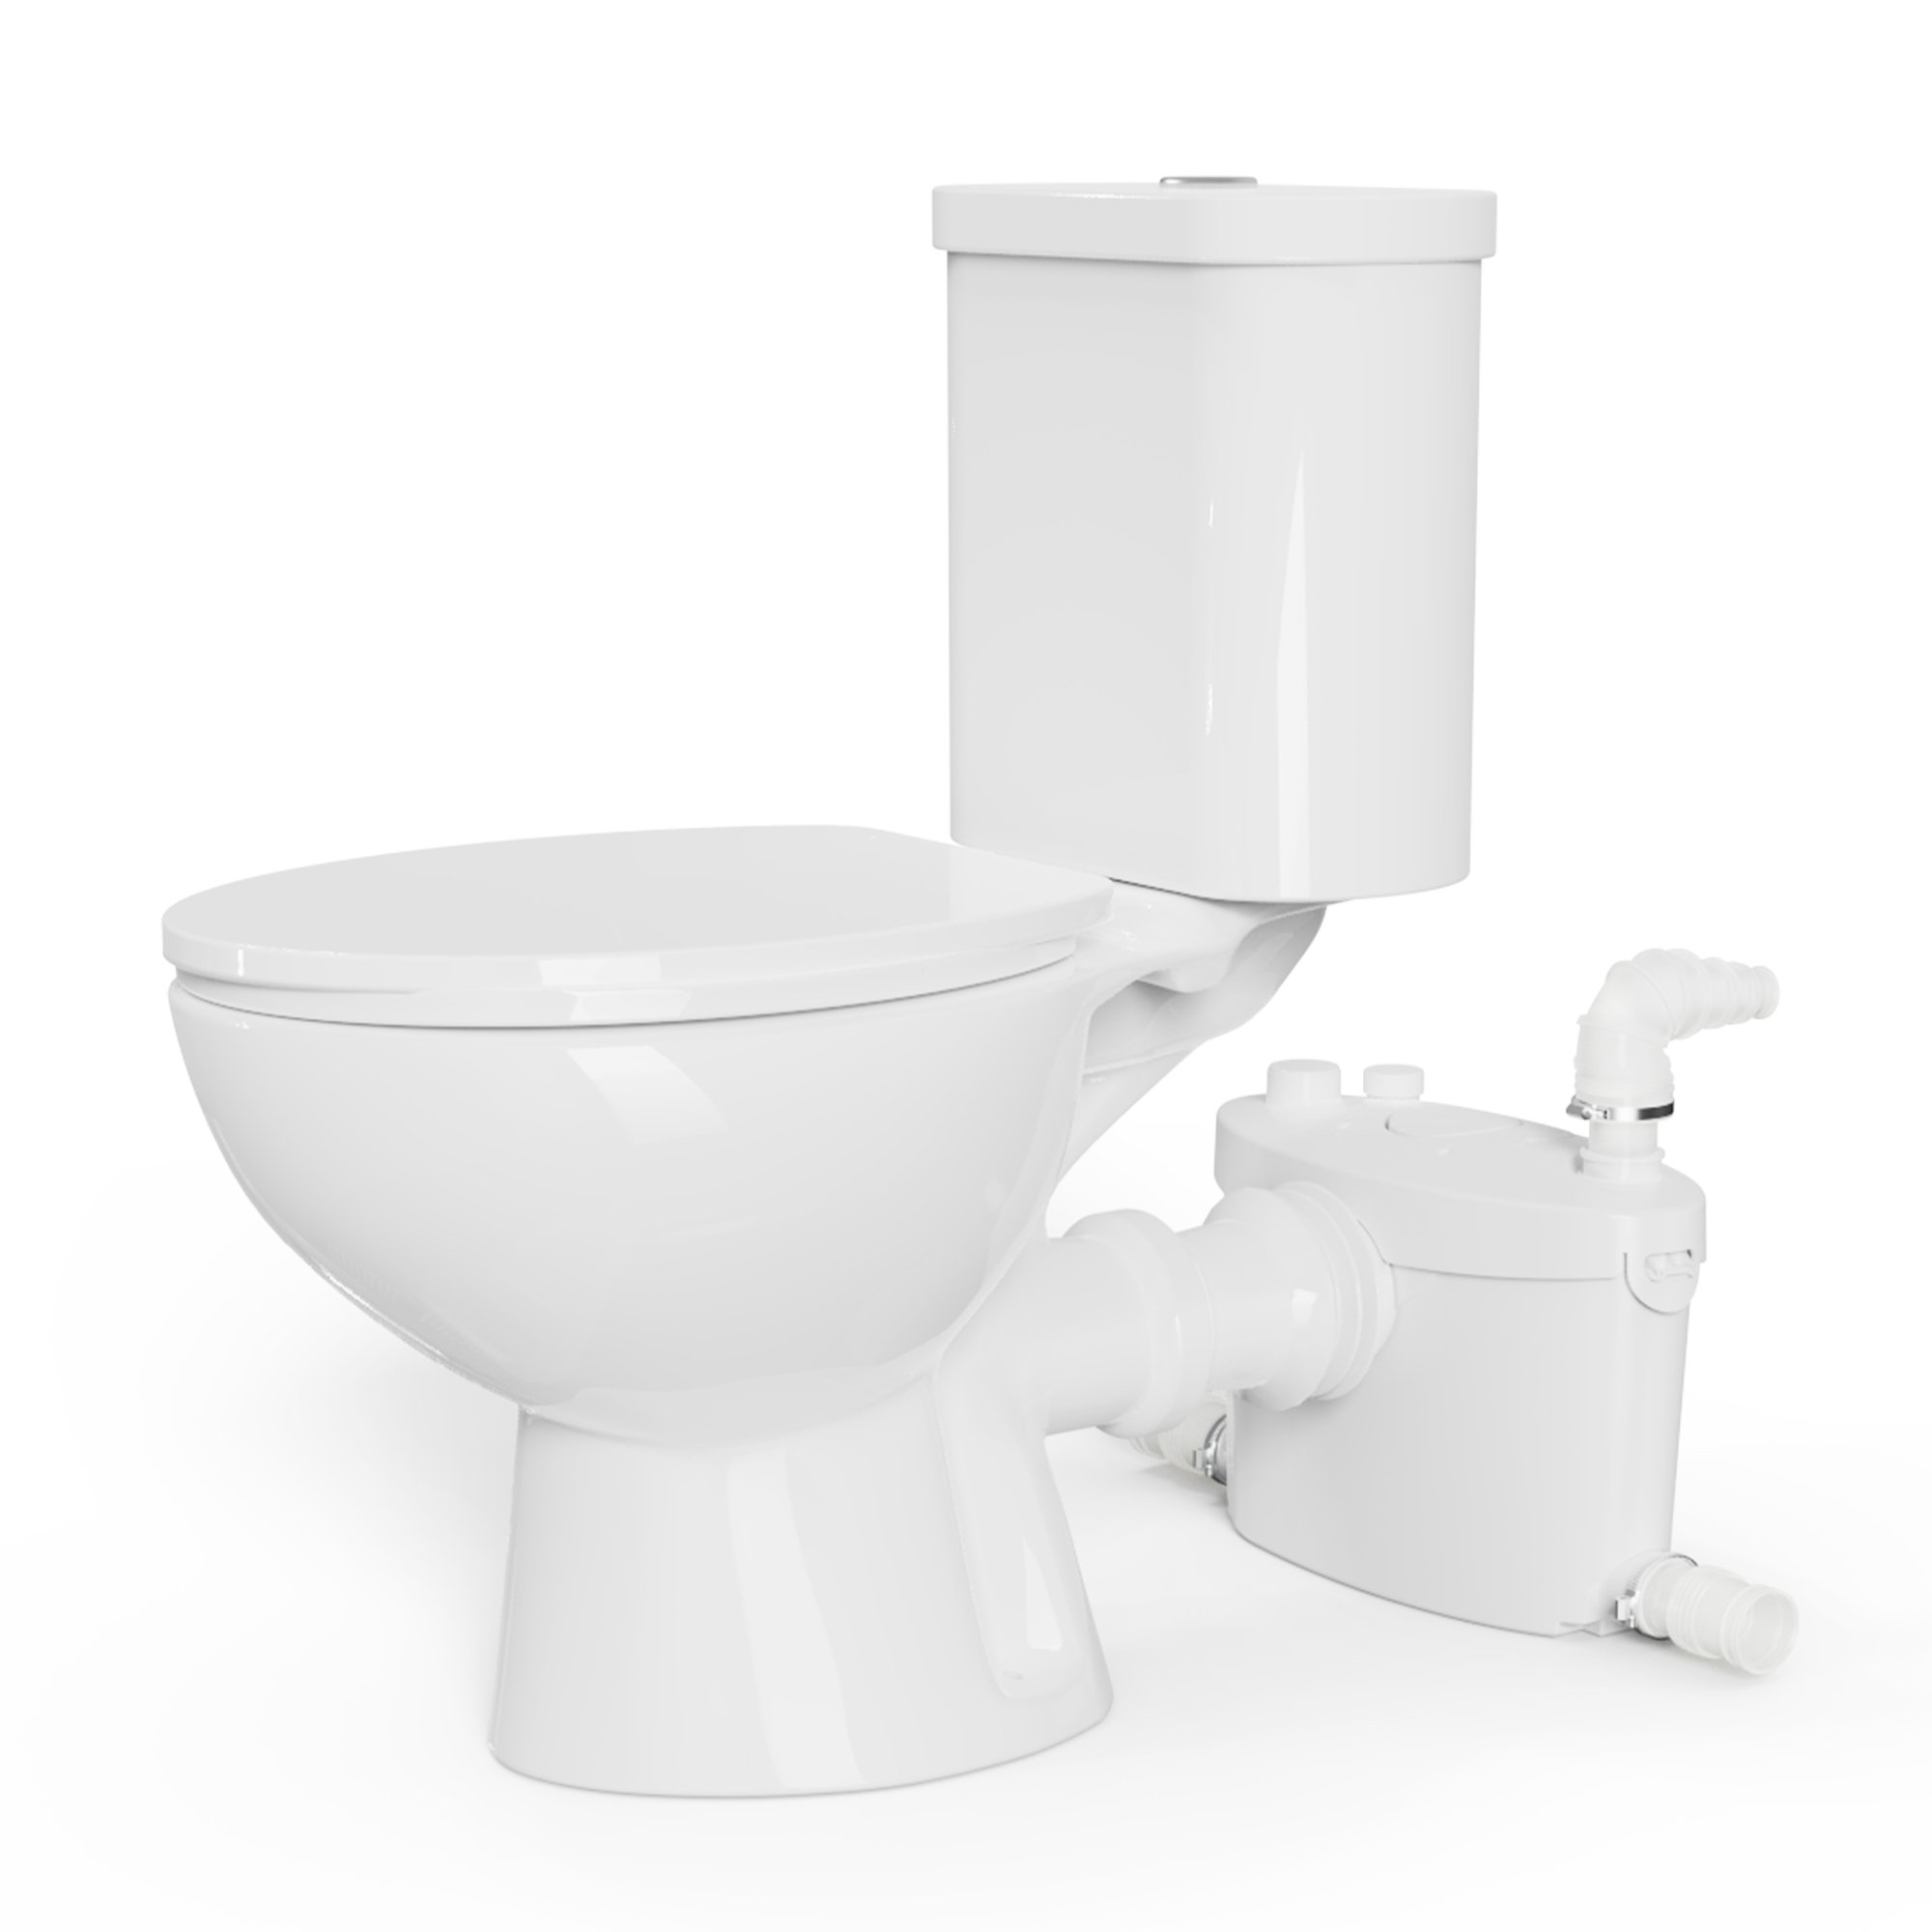 Upflush Toilet for Basement-Macerating Toilet with 600W Macerator Pump with  4 Water Inlets for Bathroom, Sink, Laundry